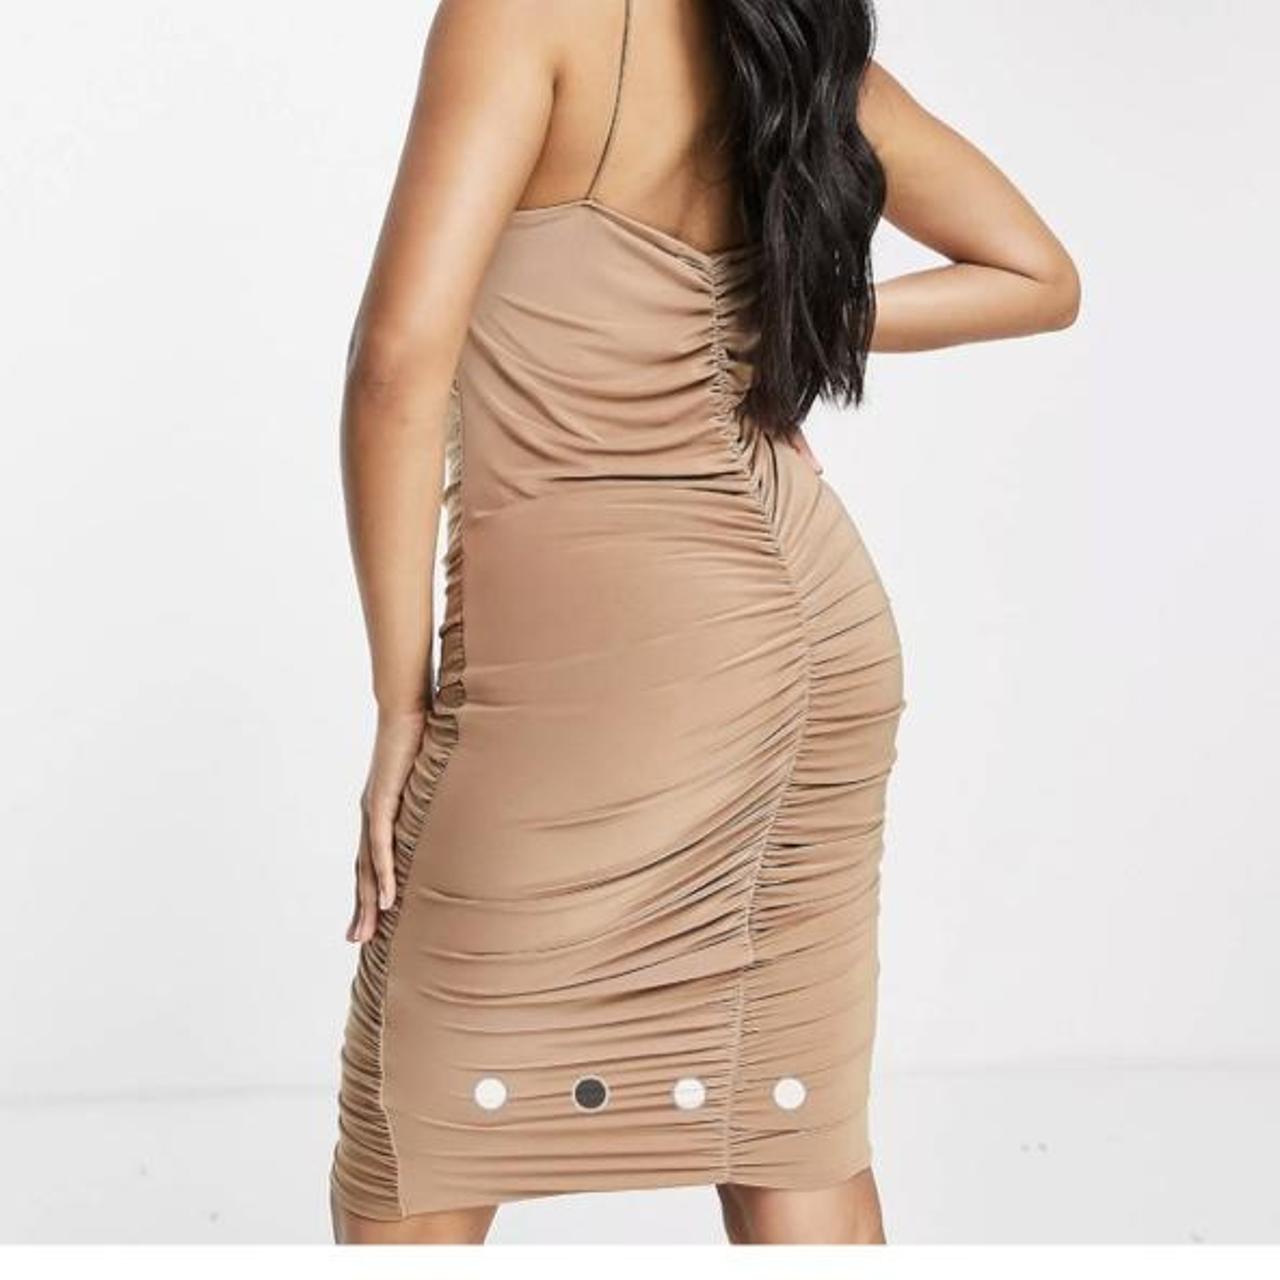 Femme Luxe Women's Tan and Brown Dress (4)